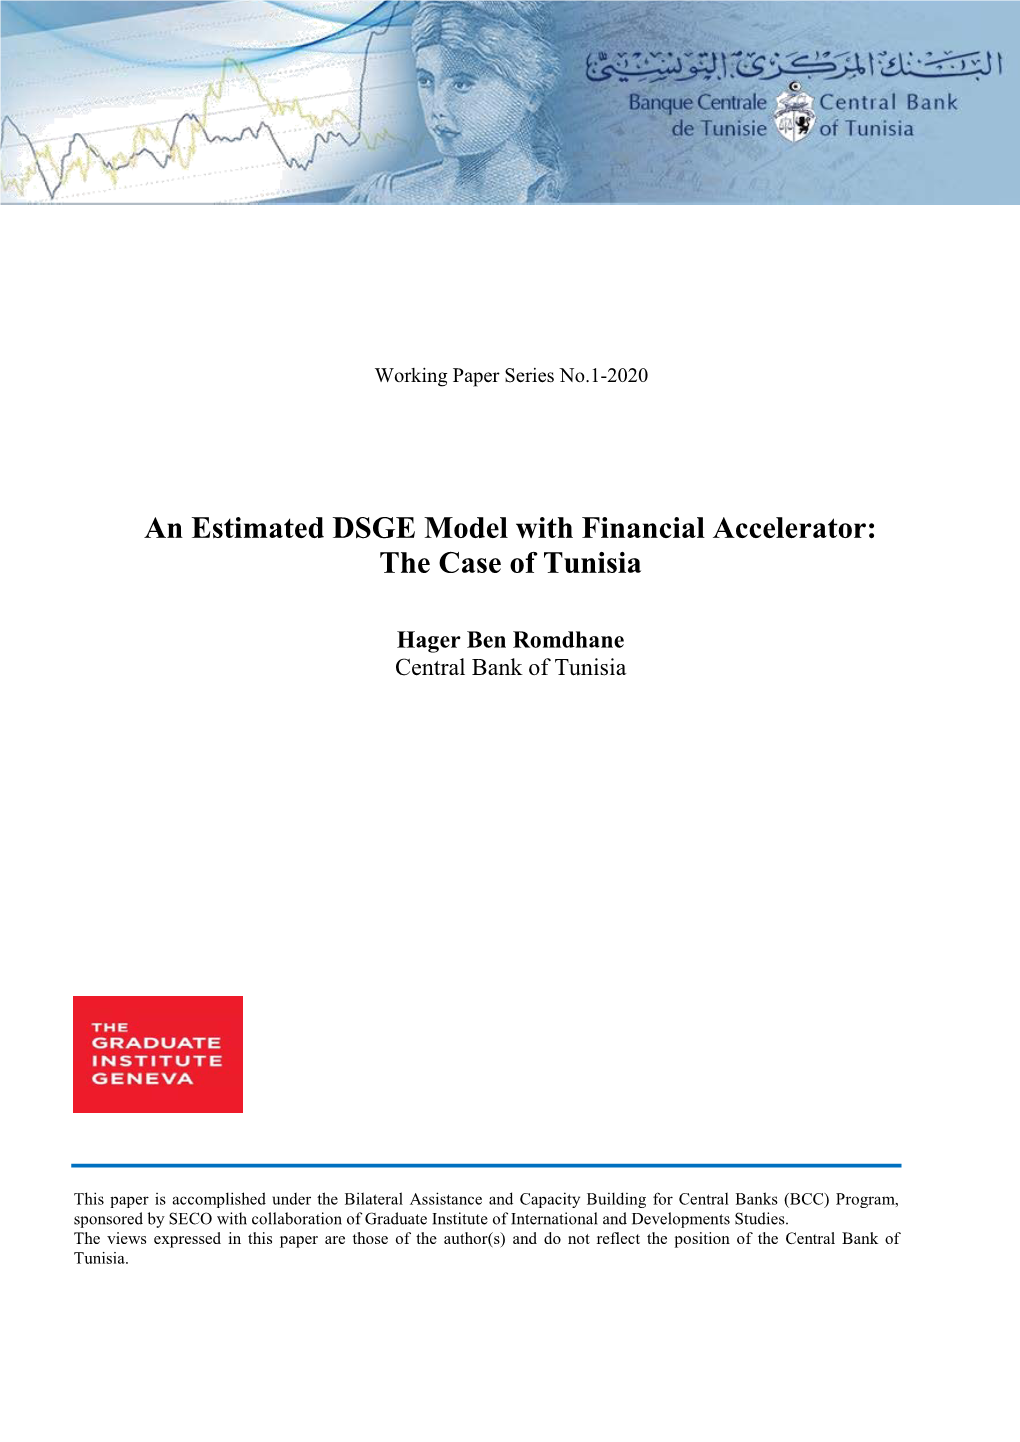 An Estimated DSGE Model with Financial Accelerator: the Case of Tunisia